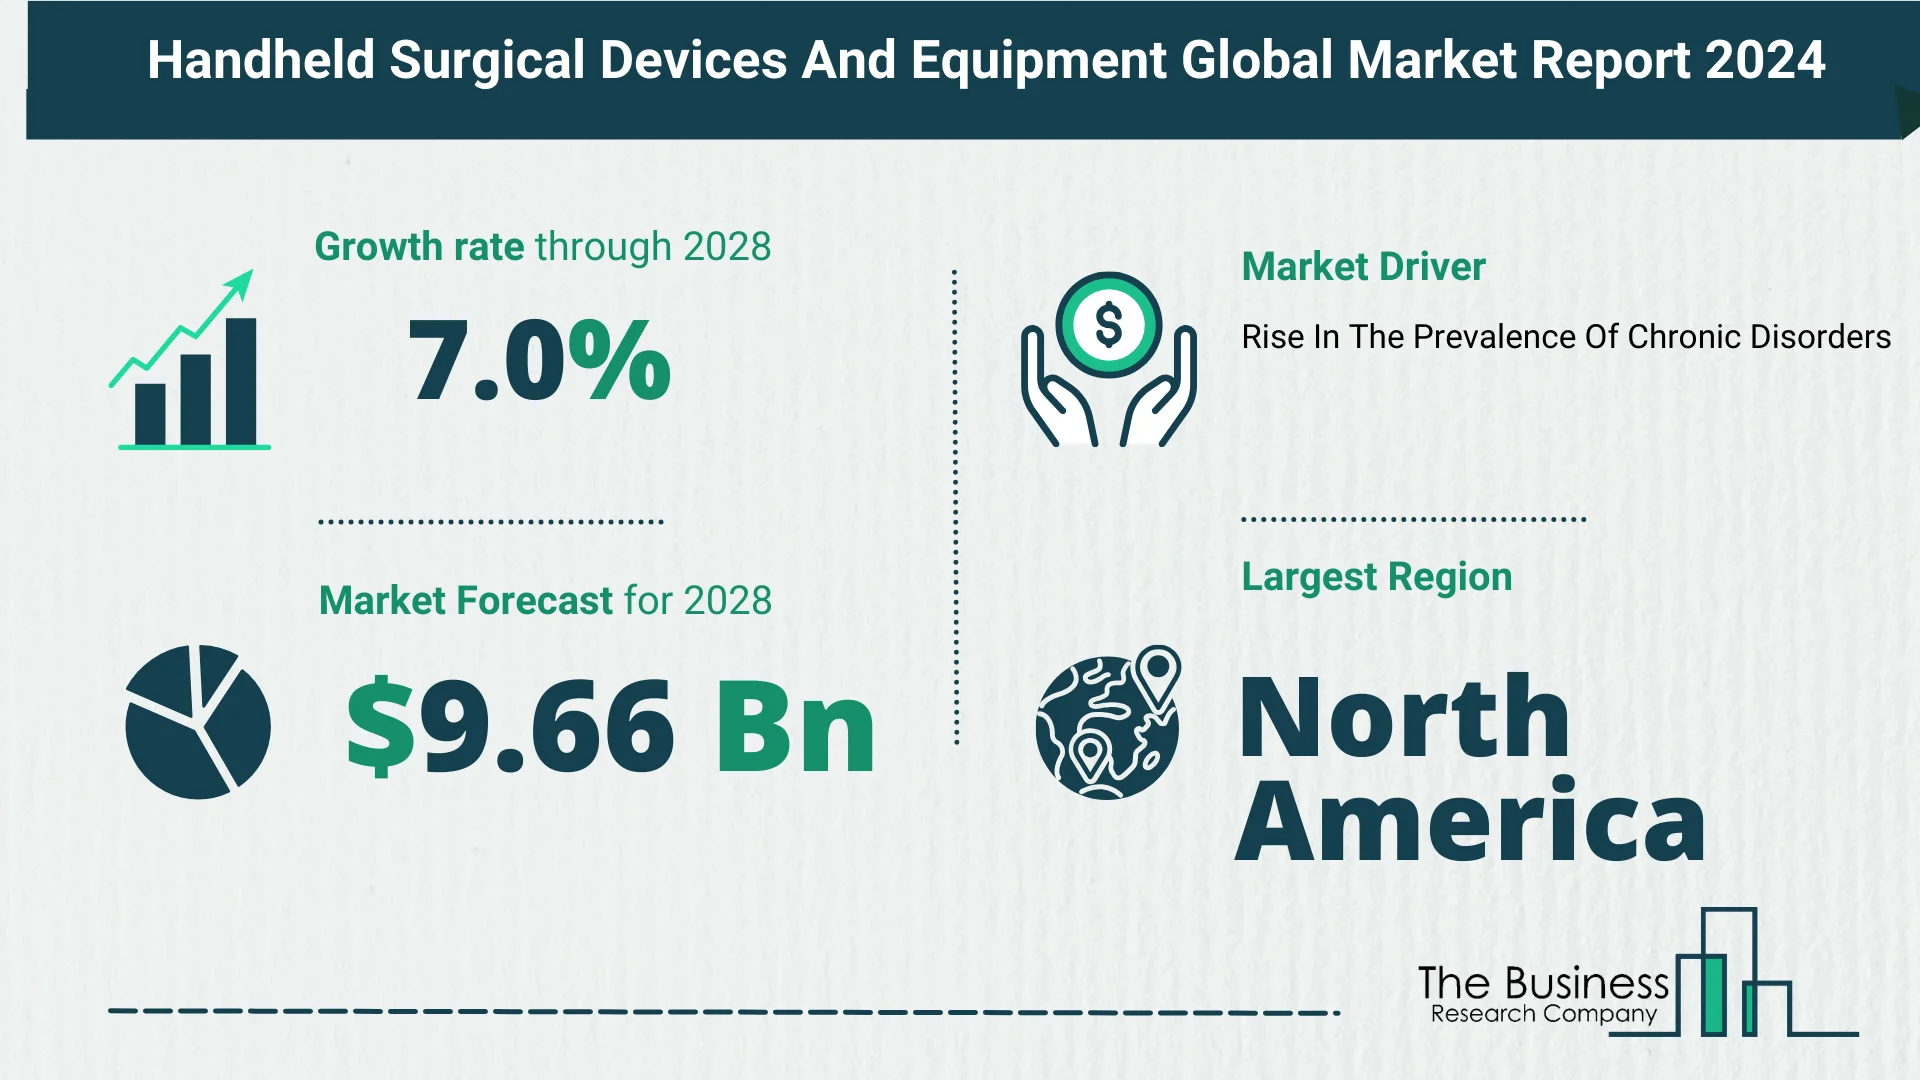 Key Takeaways From The Global Handheld Surgical Devices And Equipment Market Forecast 2024